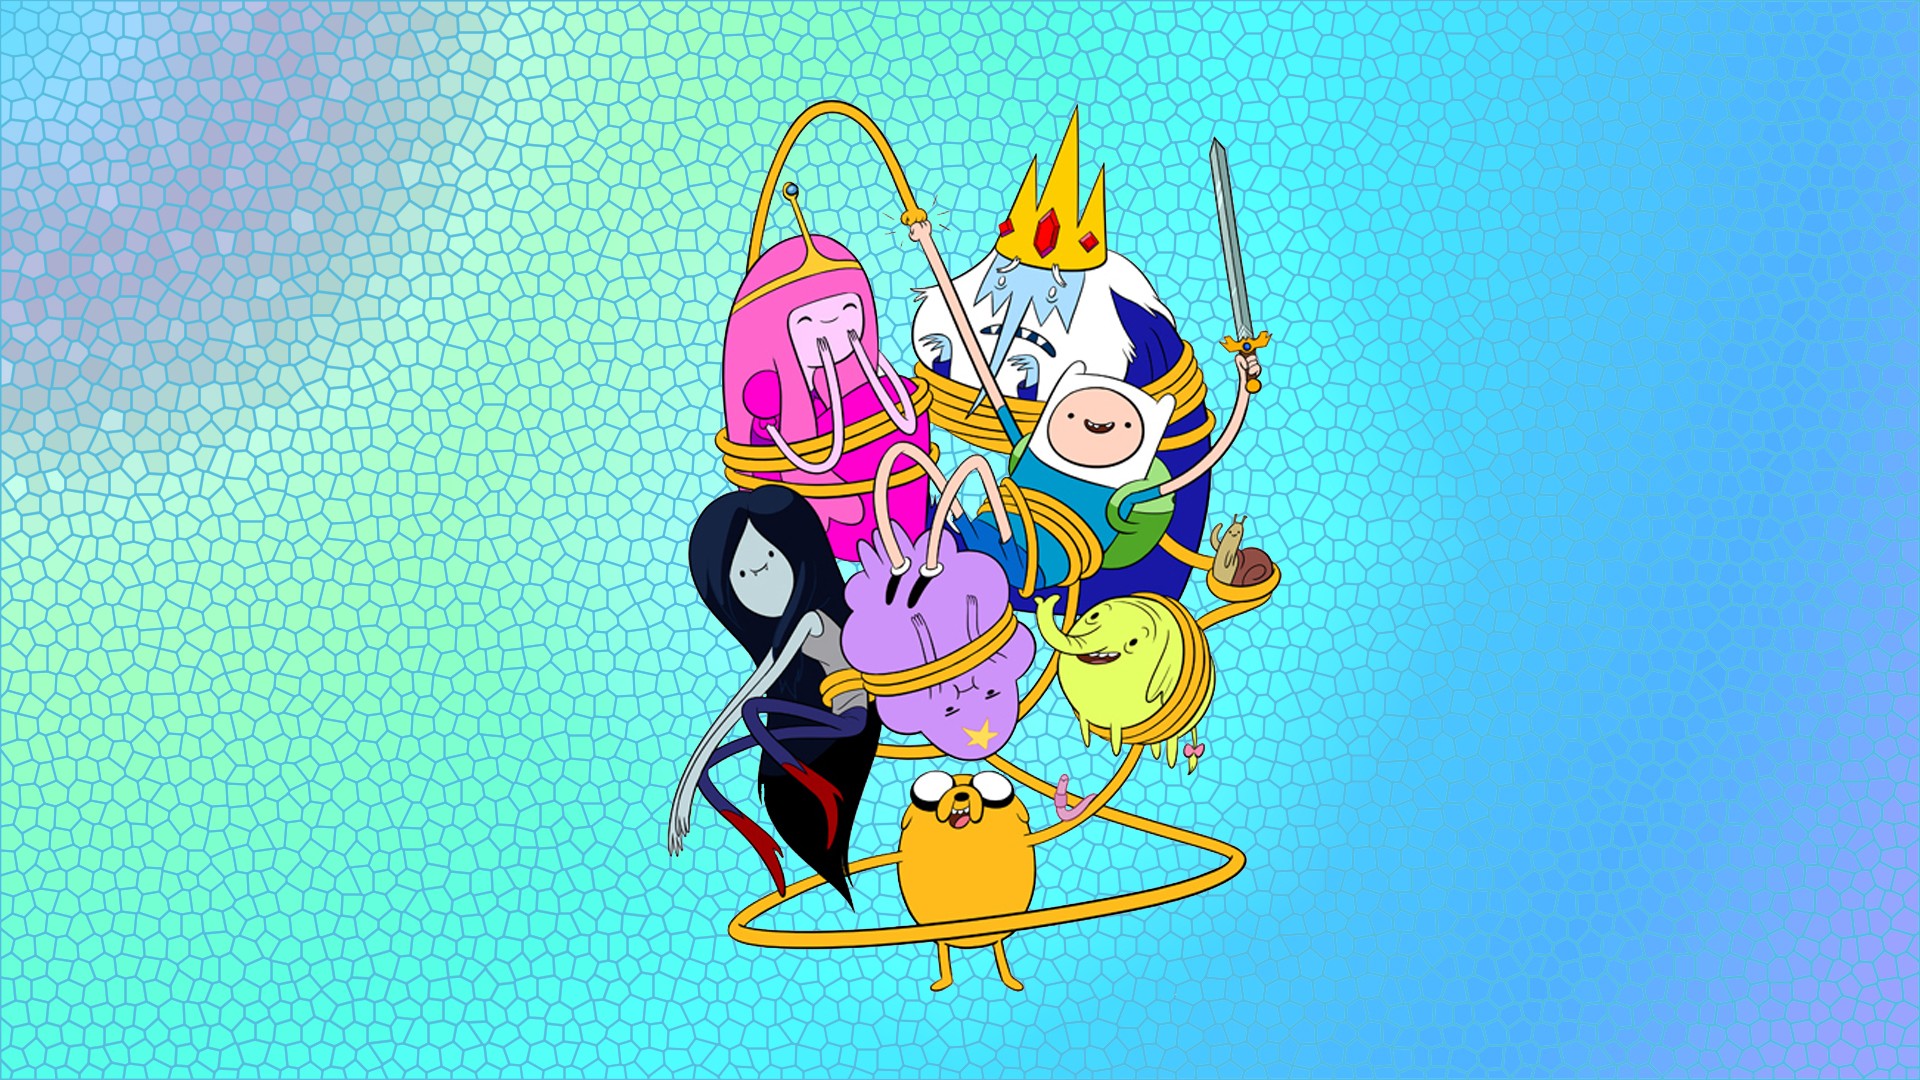 Adventure Time Marceline The Vampire Queen Princess Bubblegum Ice King Jake The Dog Lumpy Space Prin 1920x1080